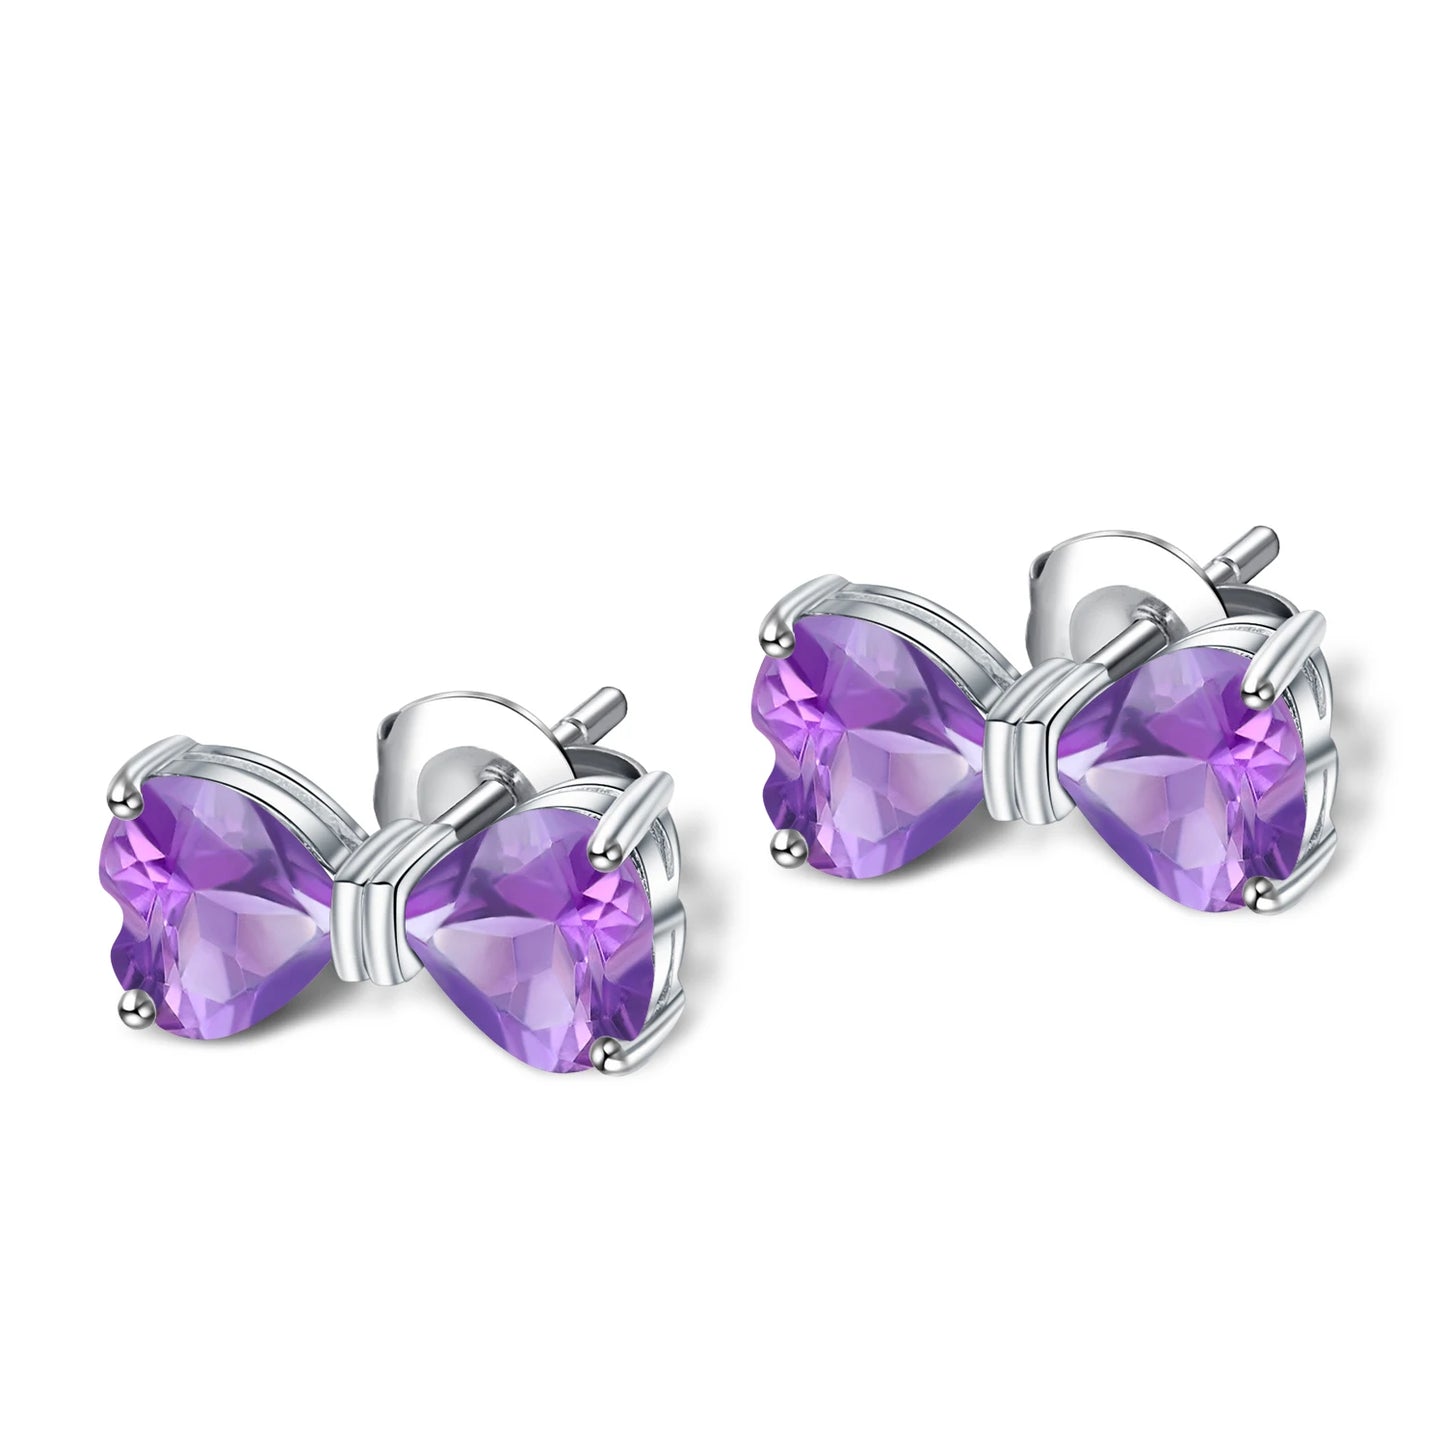 GEM'S BALLET 925 Sterling Silver Bow-knot Stud Earrings 3.13Ct Natural Heart Citrine Gemstone Earrings for Women Fine Jewelry Amethyst 925 Sterling Silver CHINA